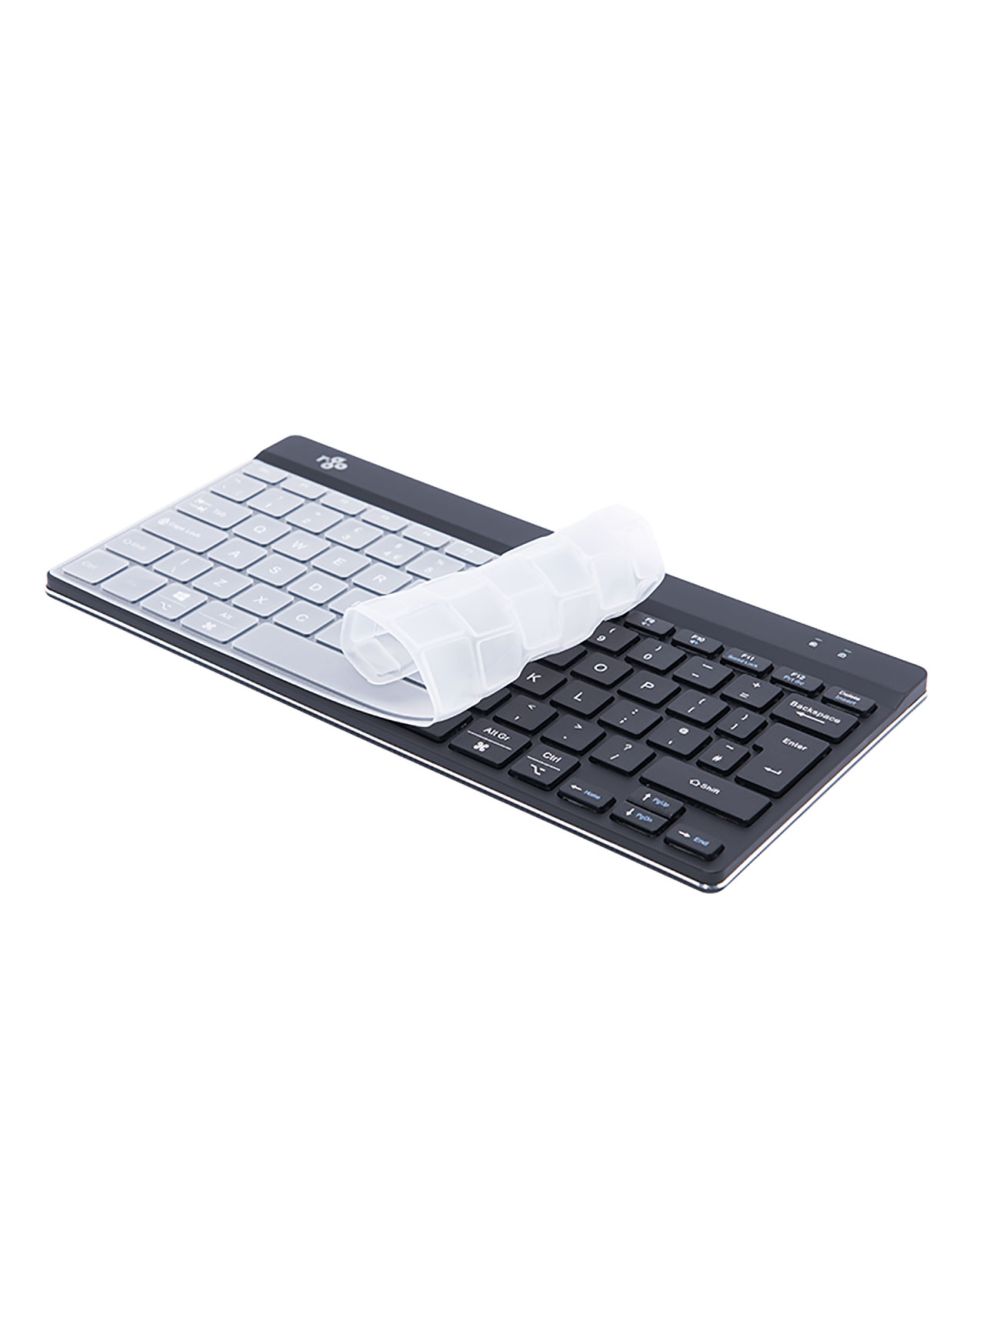 Protective washable skin for R-Go compact Break keyboard